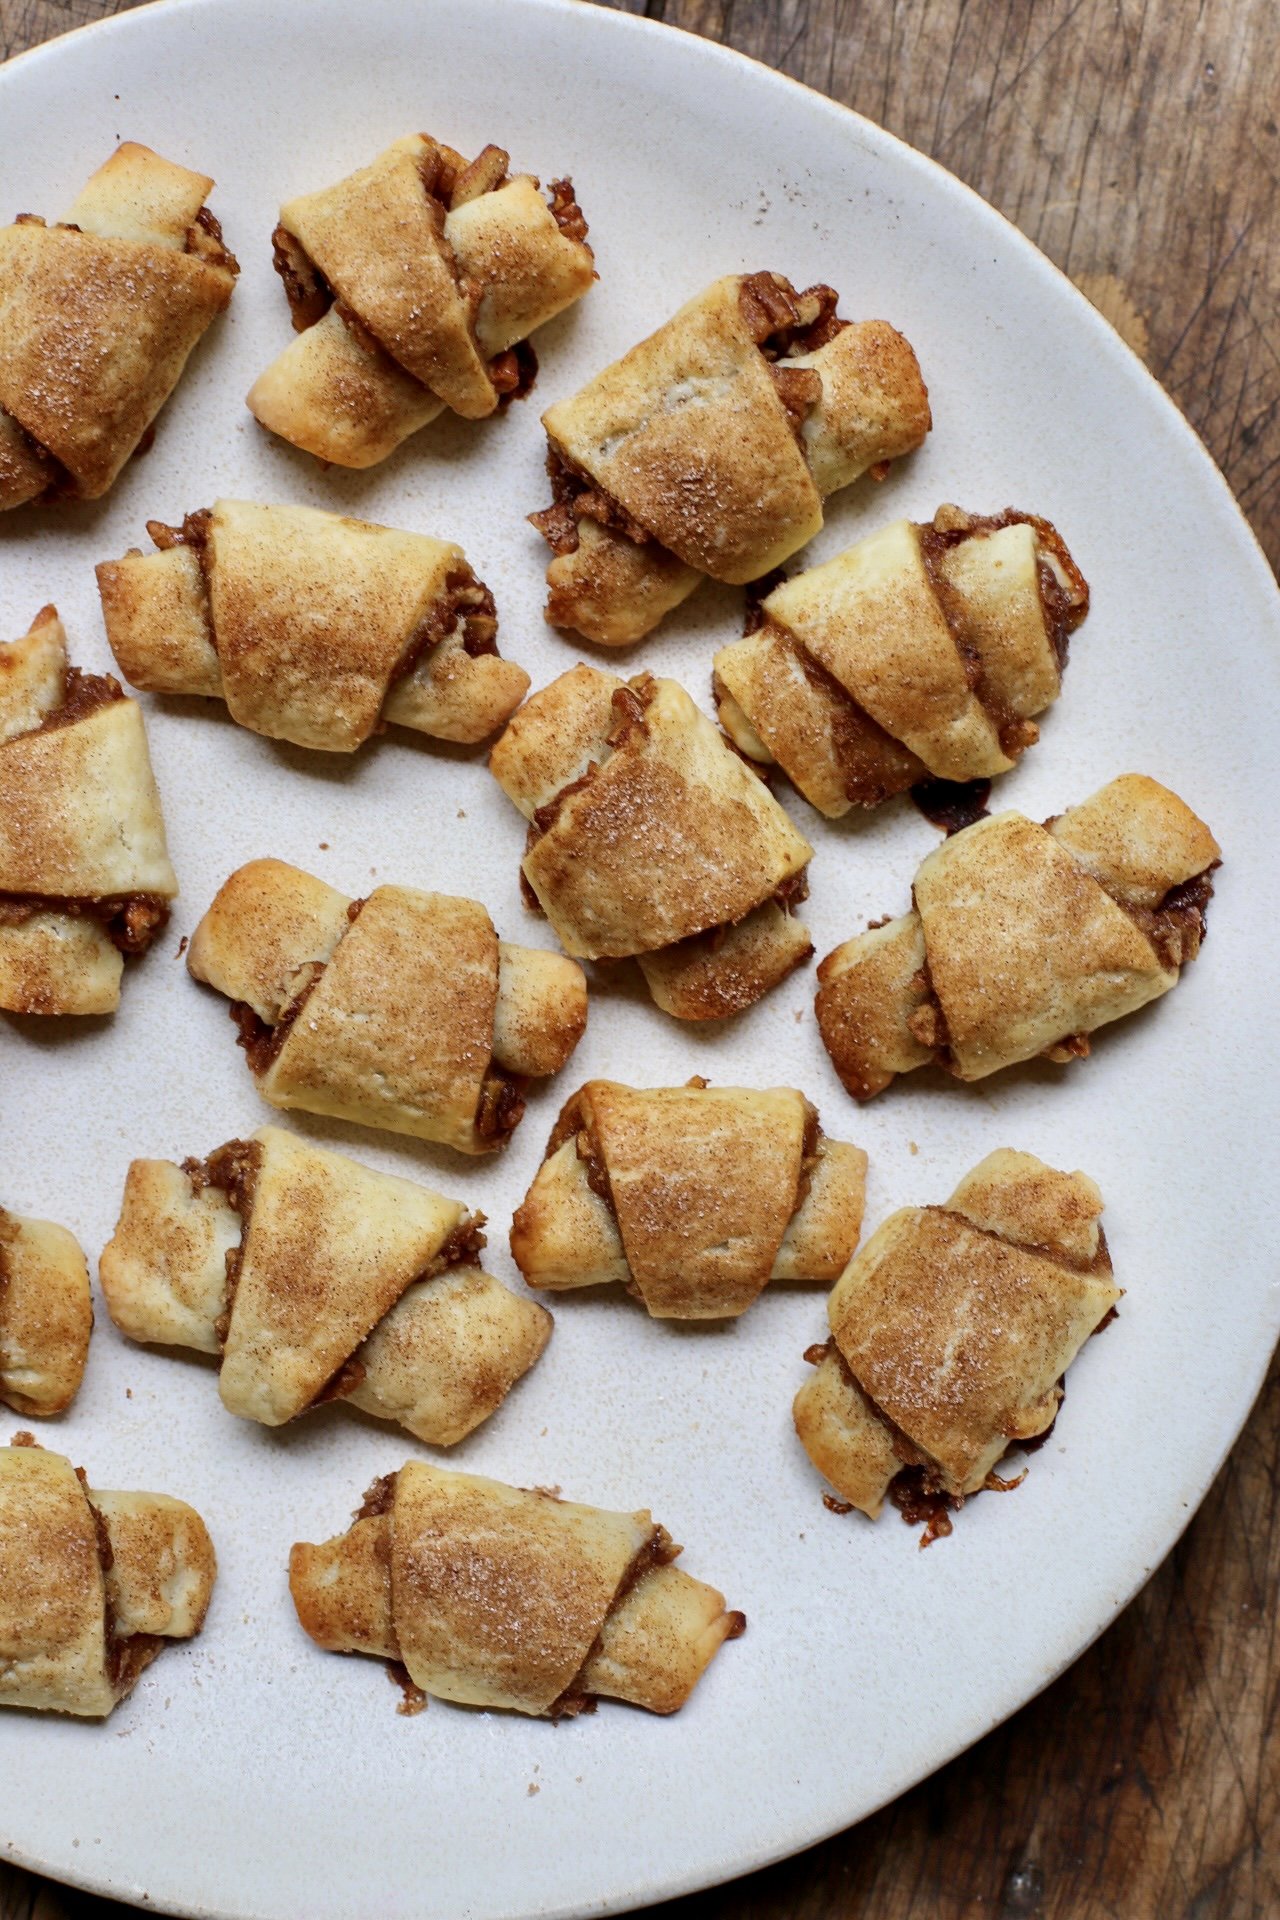 9 Great Puff Pastry Ideas Everyone Should Know! 